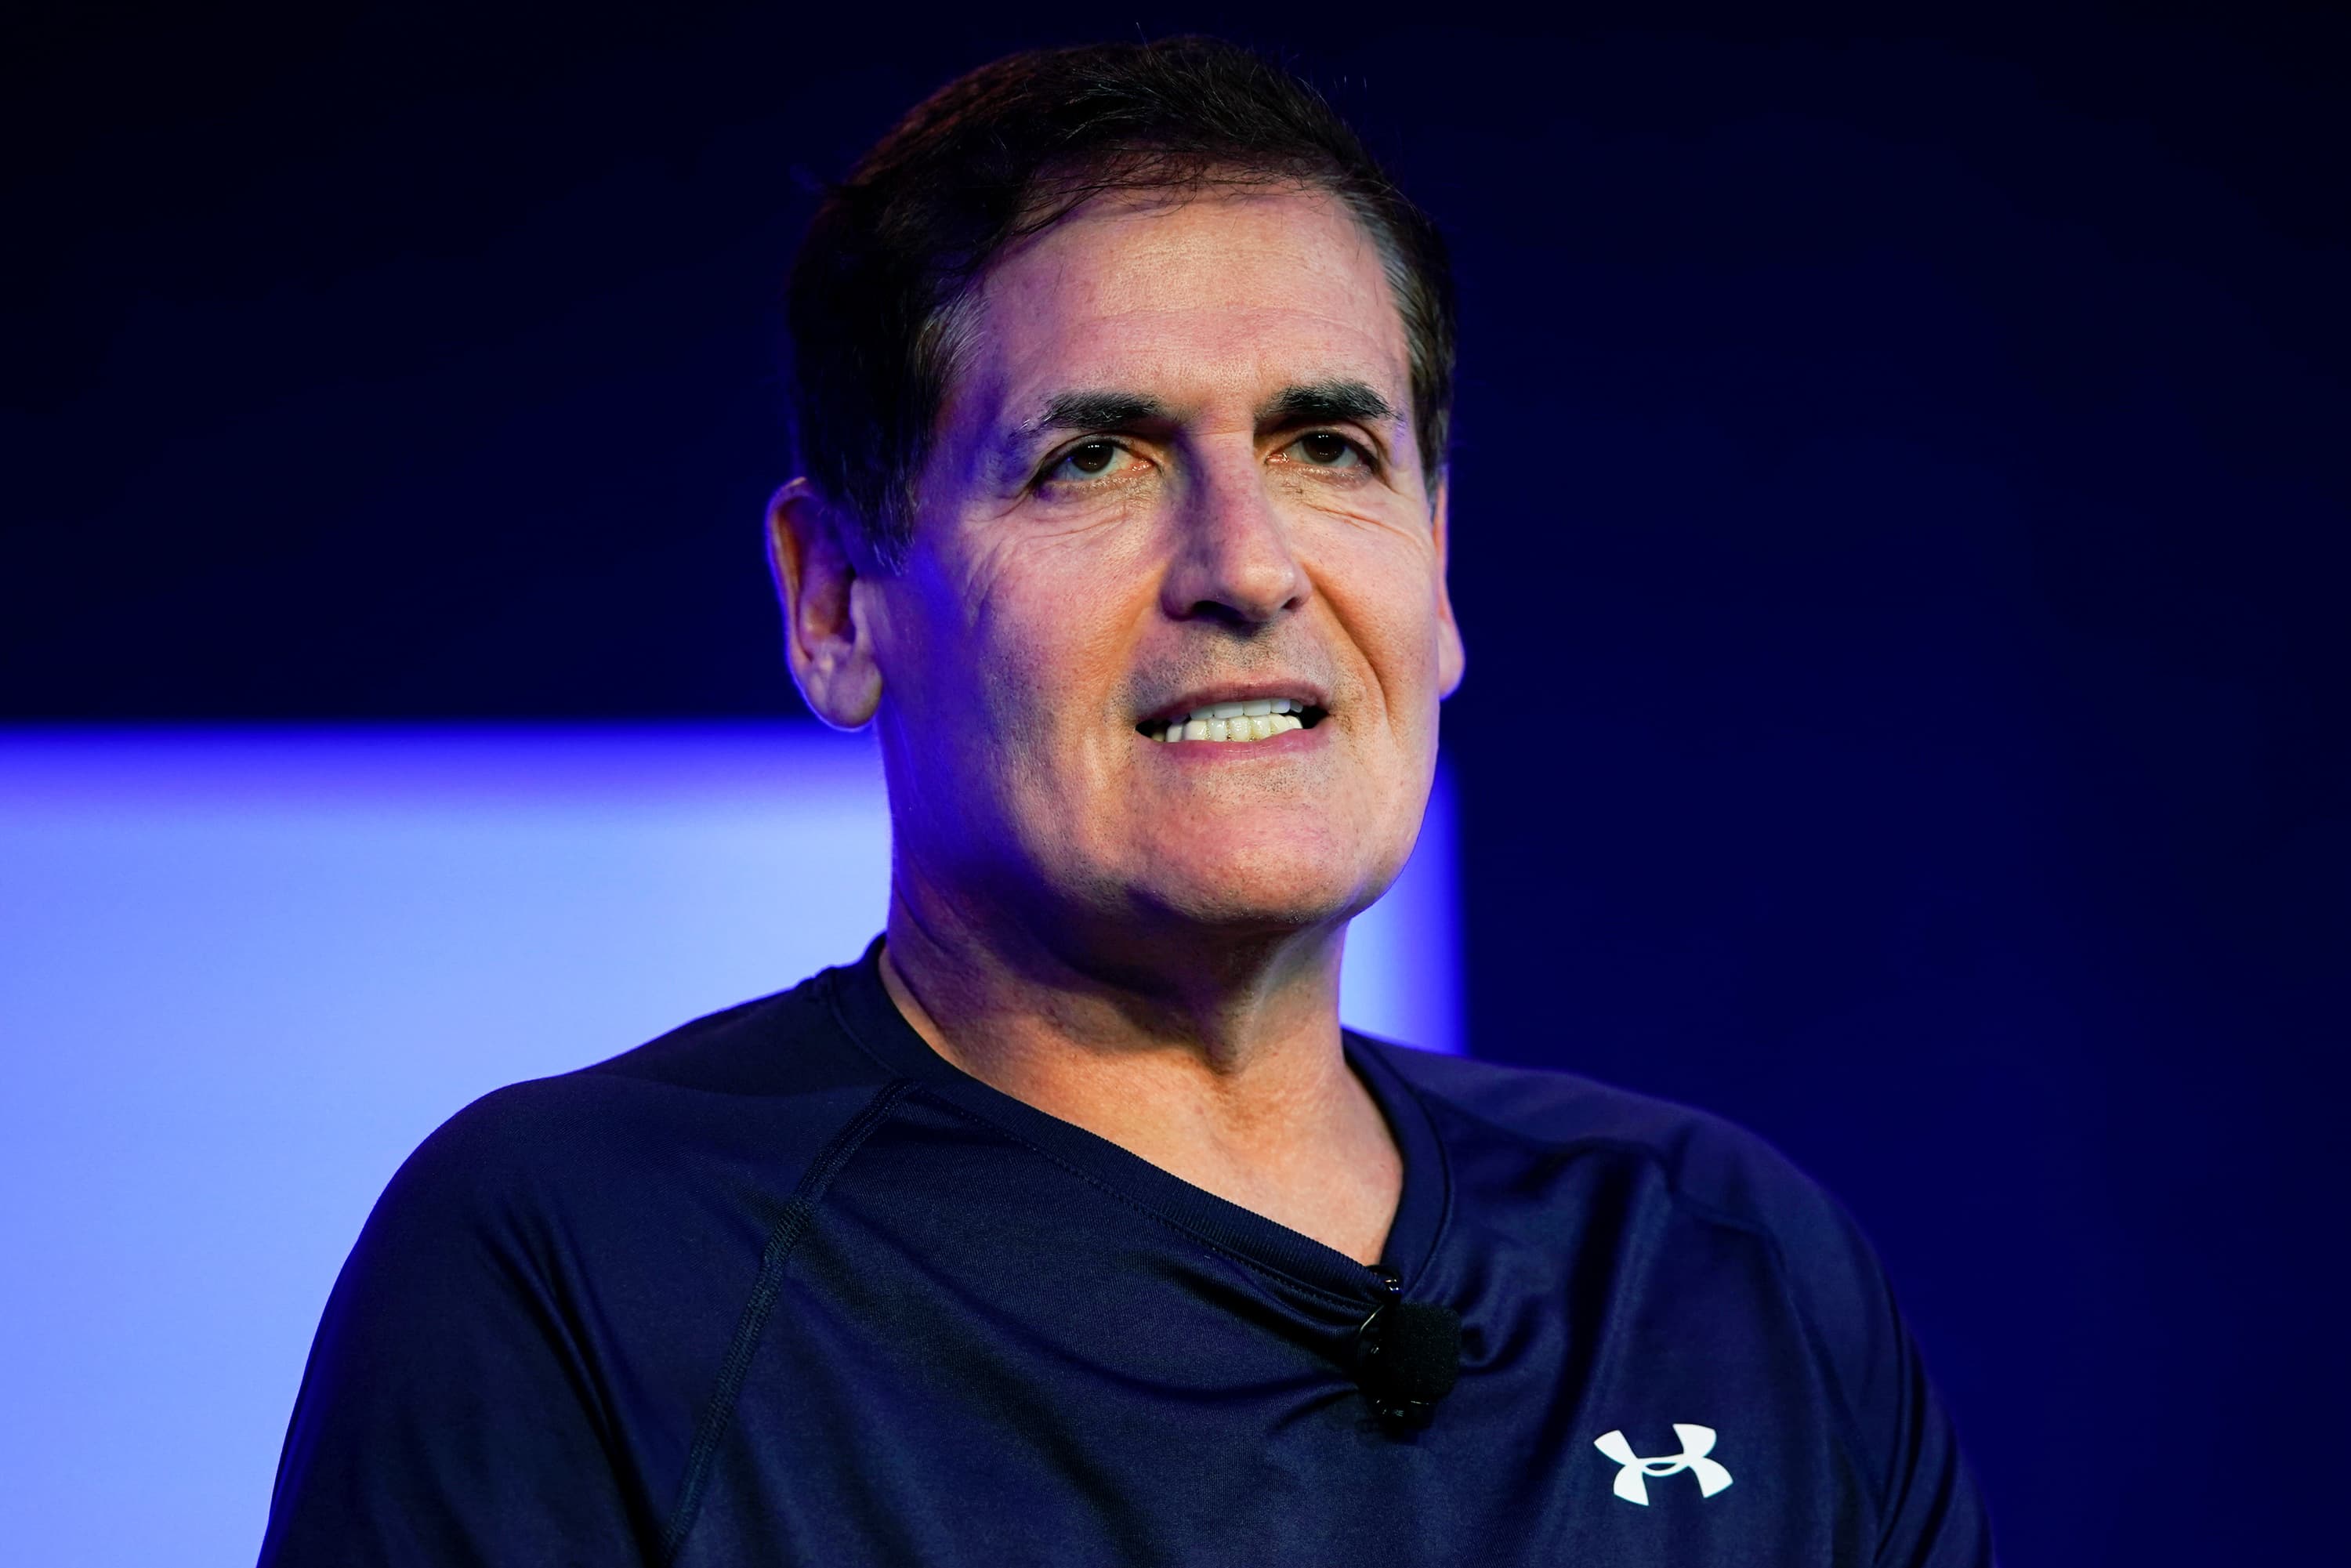 Mark Cuban says he’s worried about the market and ‘covered the hell’ of his portfolio